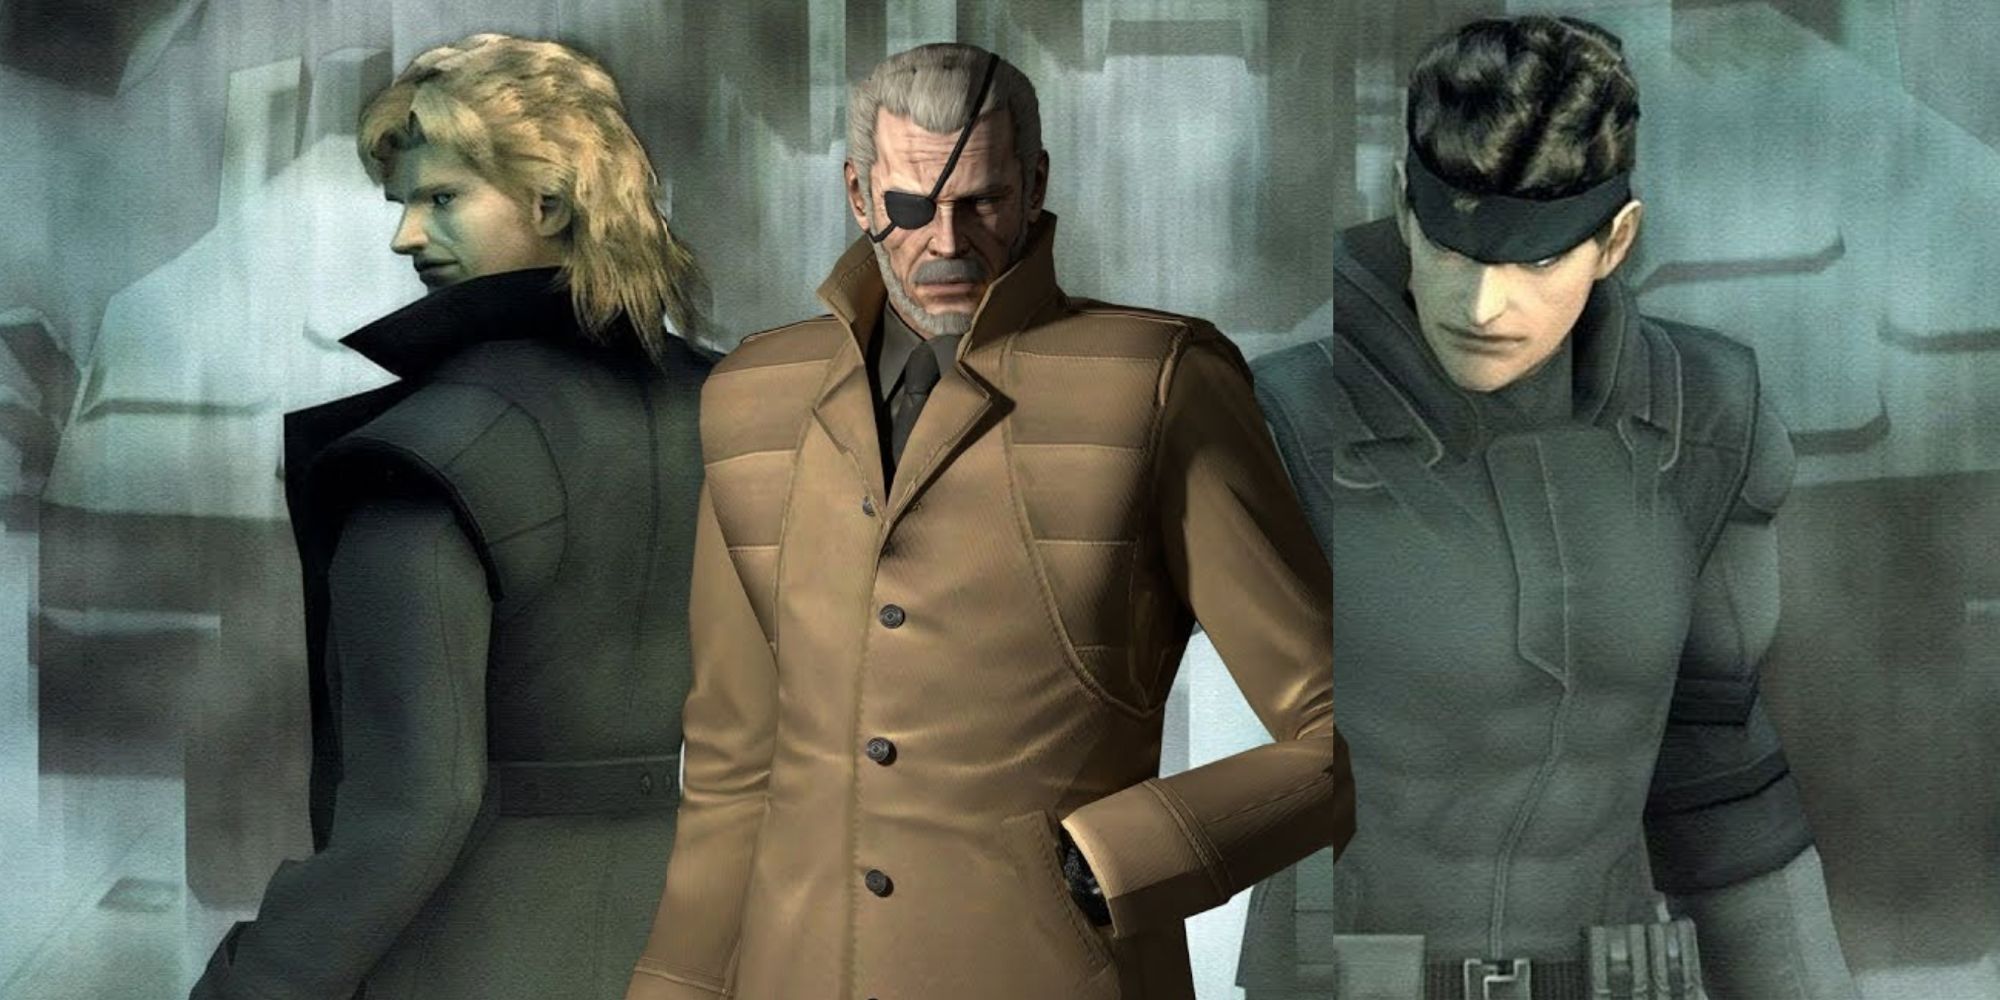 Metal Gear Solid, Solid Snake, Liquid Snake and Solidus